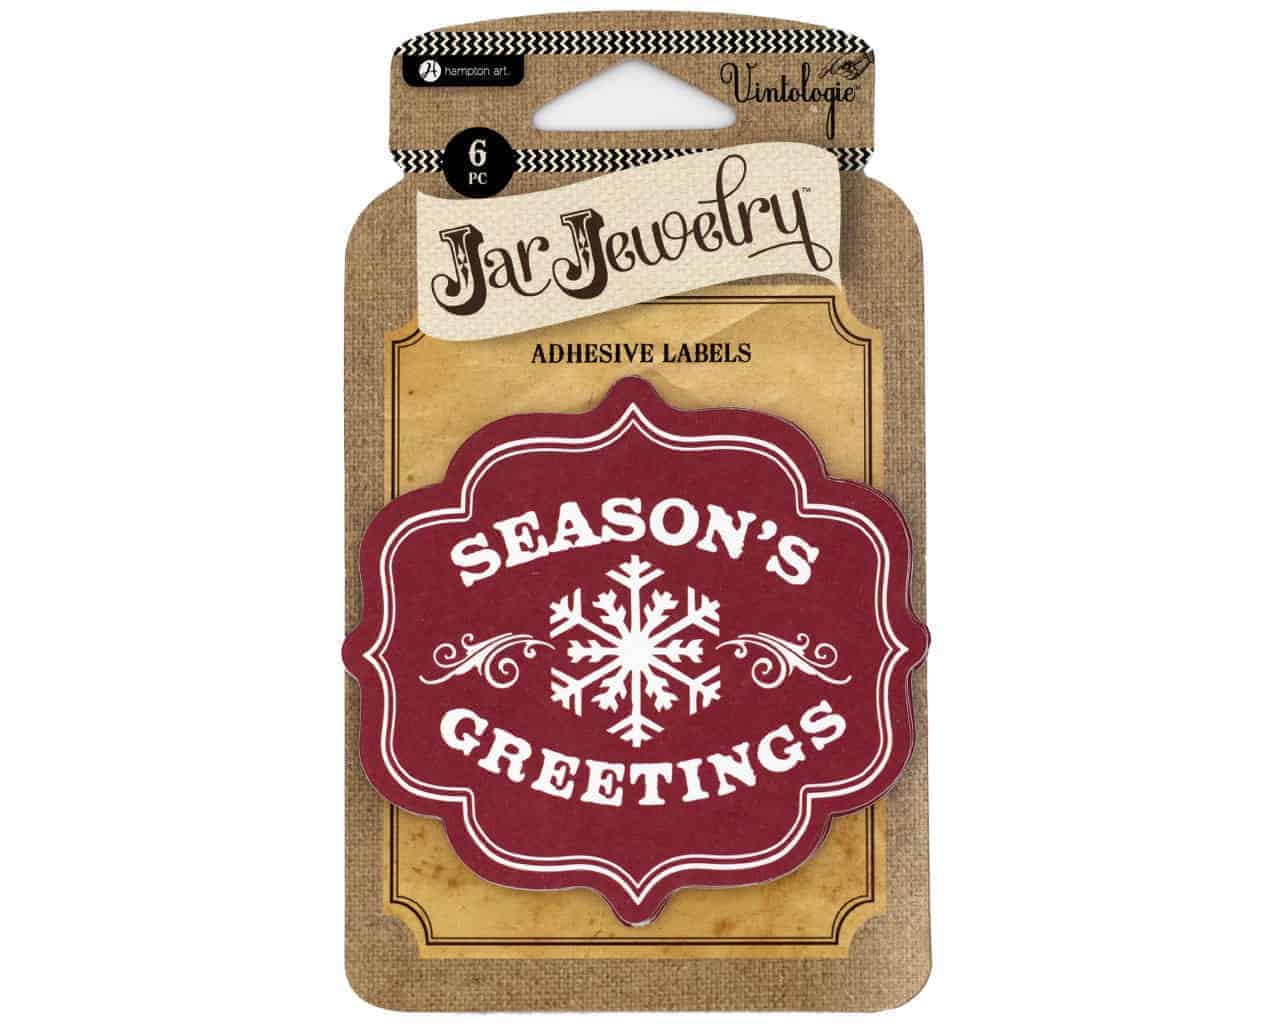 Holiday Decorations for Mason Jars by Jar Jewelry